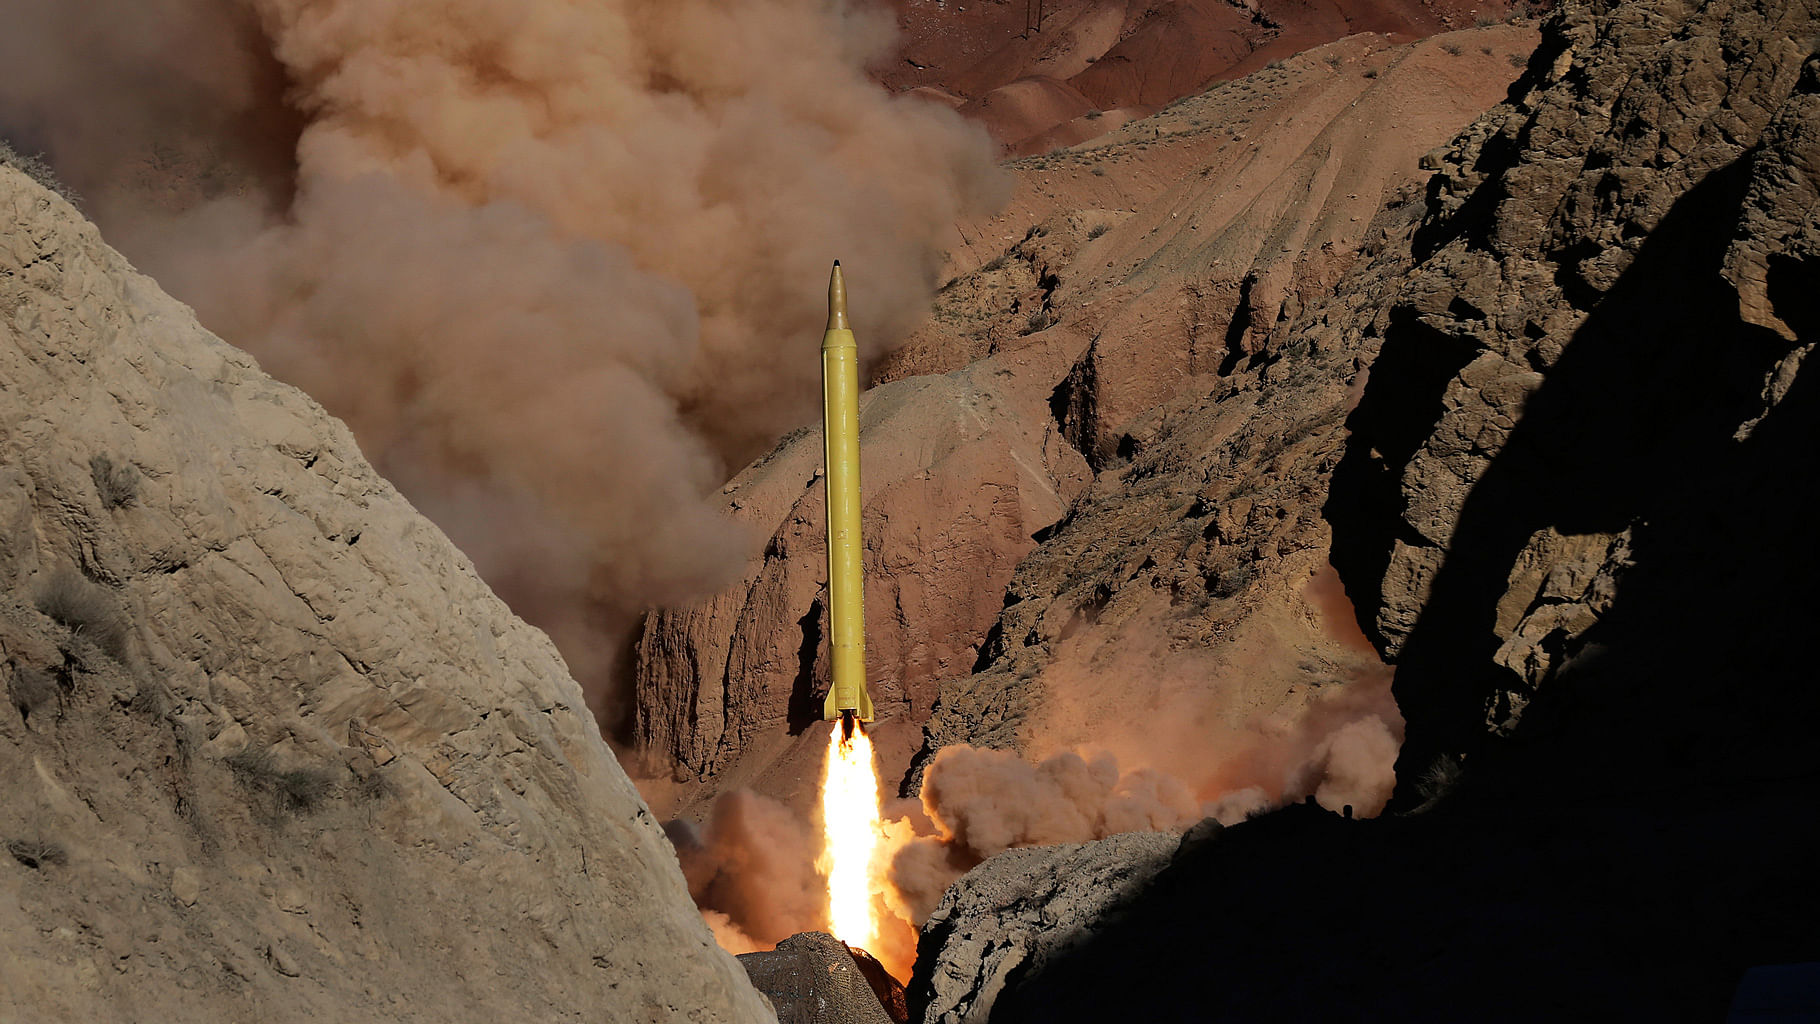 In this photo obtained from the Iranian <i>Fars News Agency</i>, a Qadr H long-range ballistic missile is fired by Iran’s Revolutionary Guard in an undisclosed location in Iran (Photo: AP)